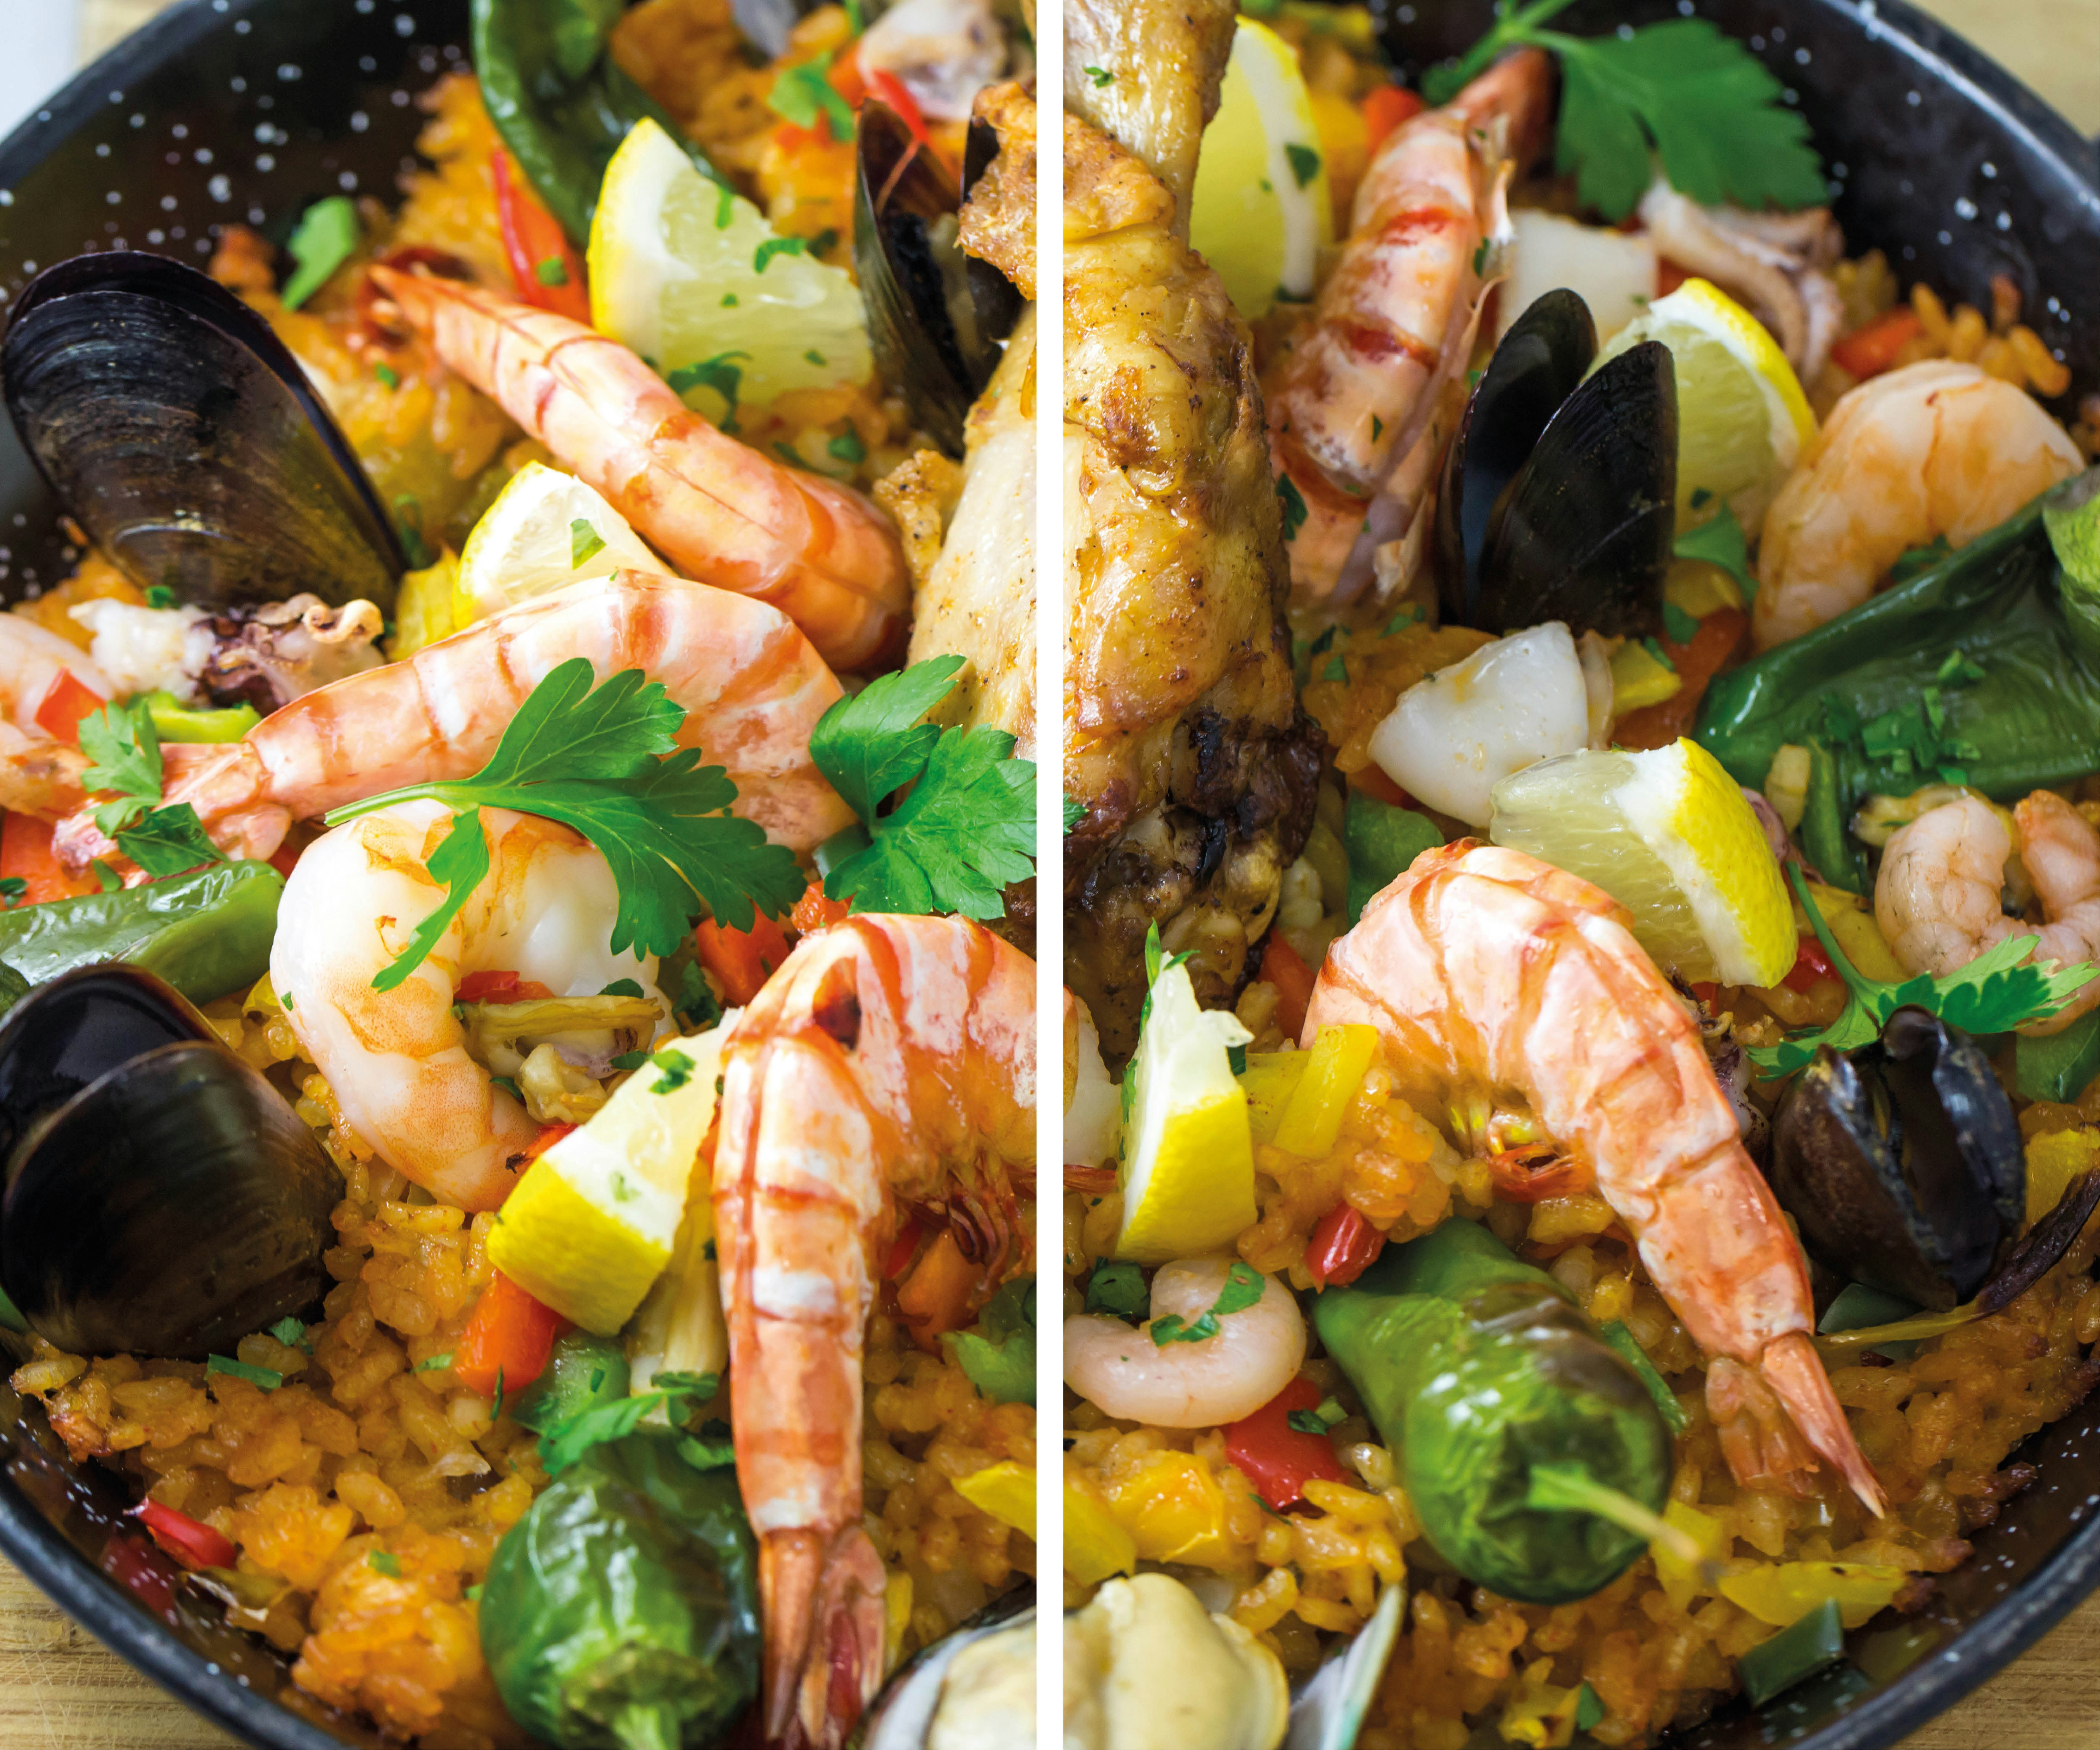 Paella Deal: Two for One!